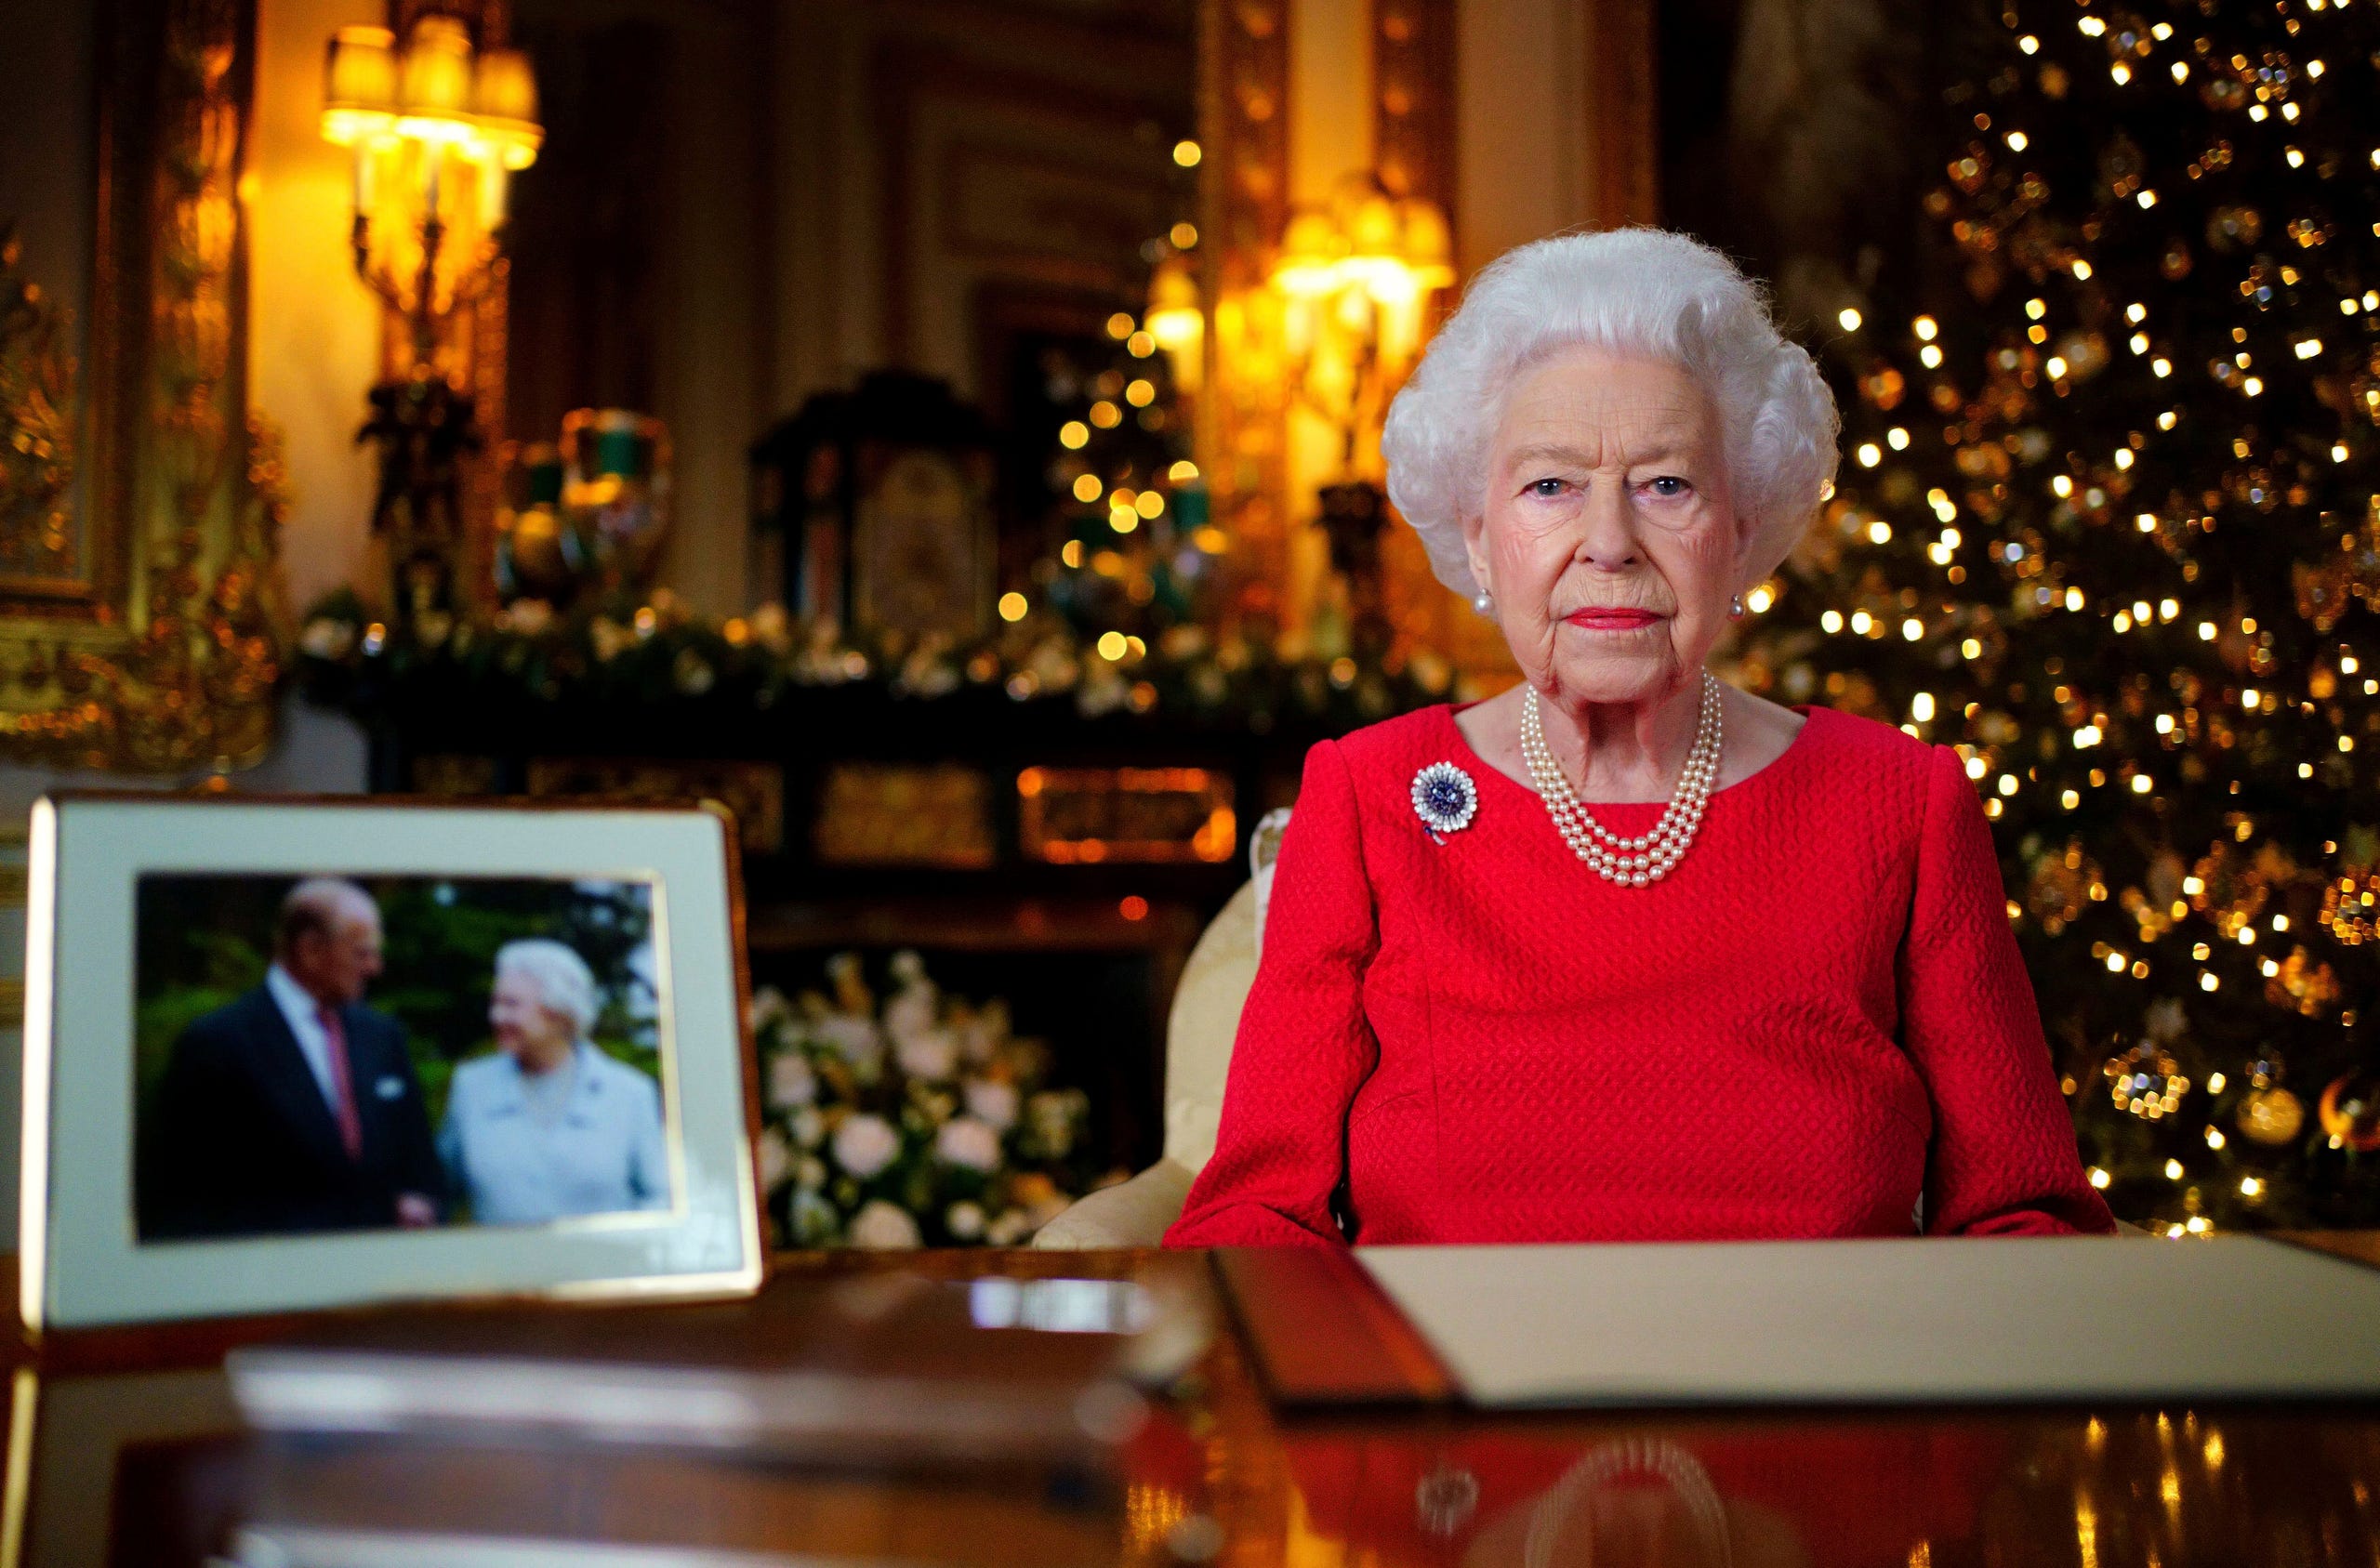 The longest Queen Elizabeth II speaks to her subjects during her annual Christmas broadcast from Windsor Castle on Dec. 25, 2021